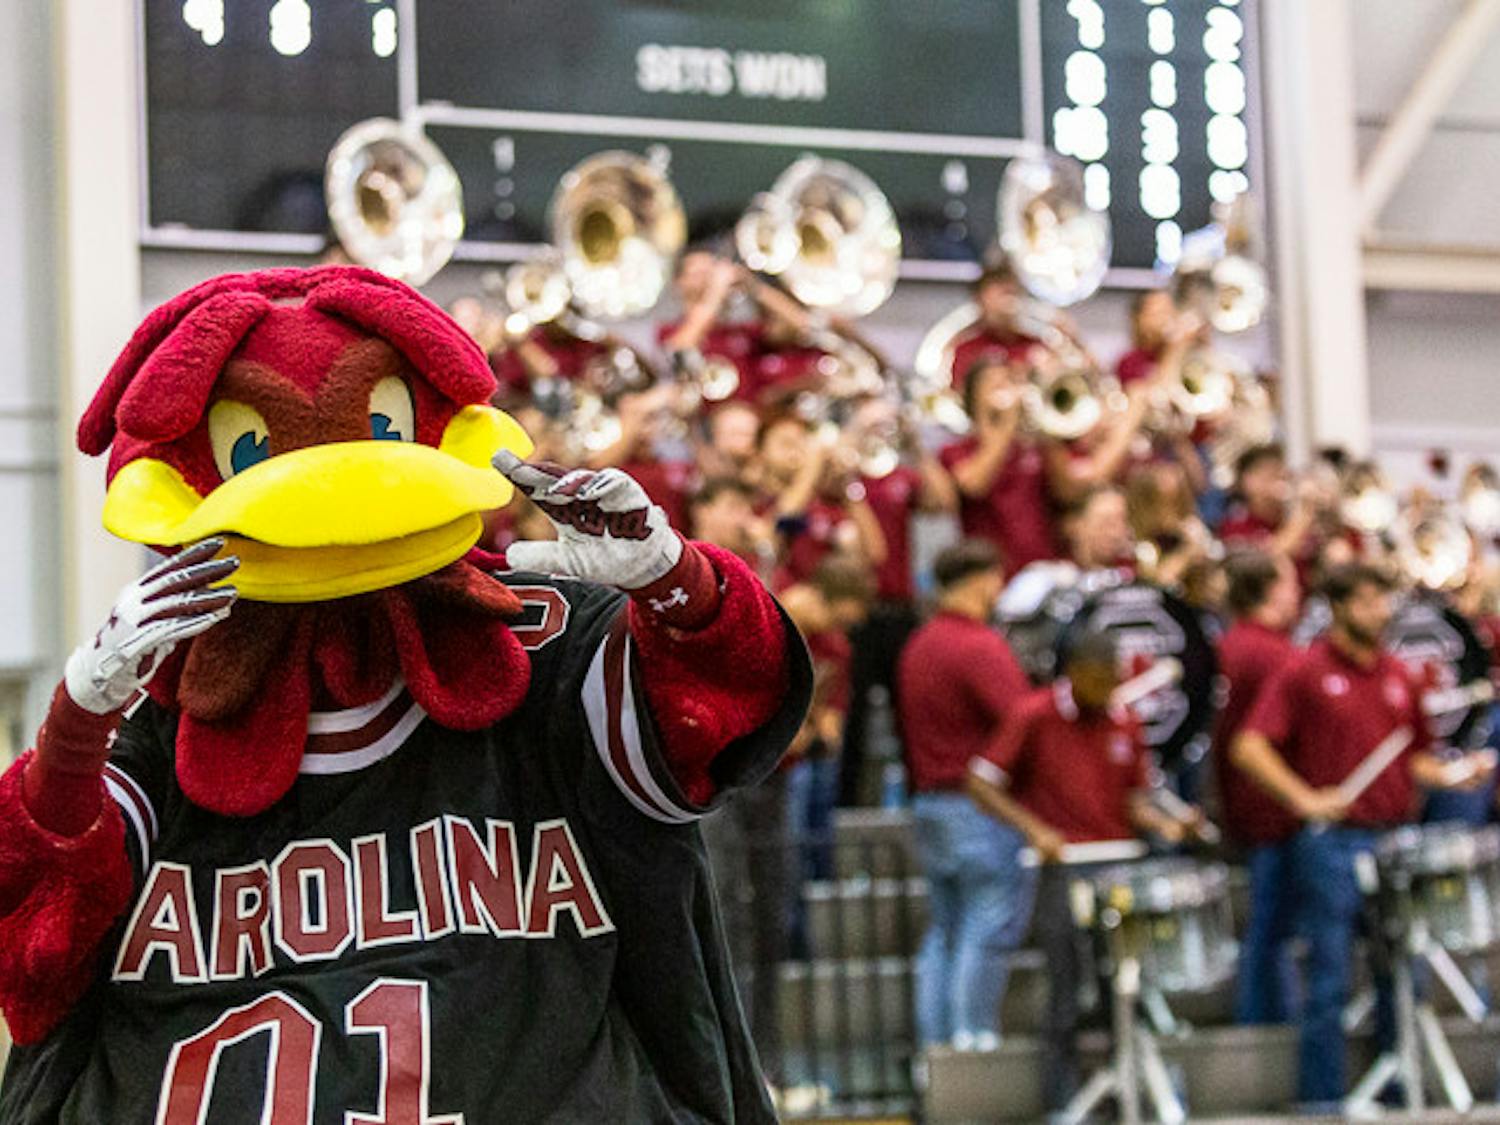 Cocky dances during the South Carolina band's performance at the matchup against Ole Miss on Nov. 5, 2022. The band acts as a moral boost for the players as fans, getting the crowd hyped between plays.&nbsp;